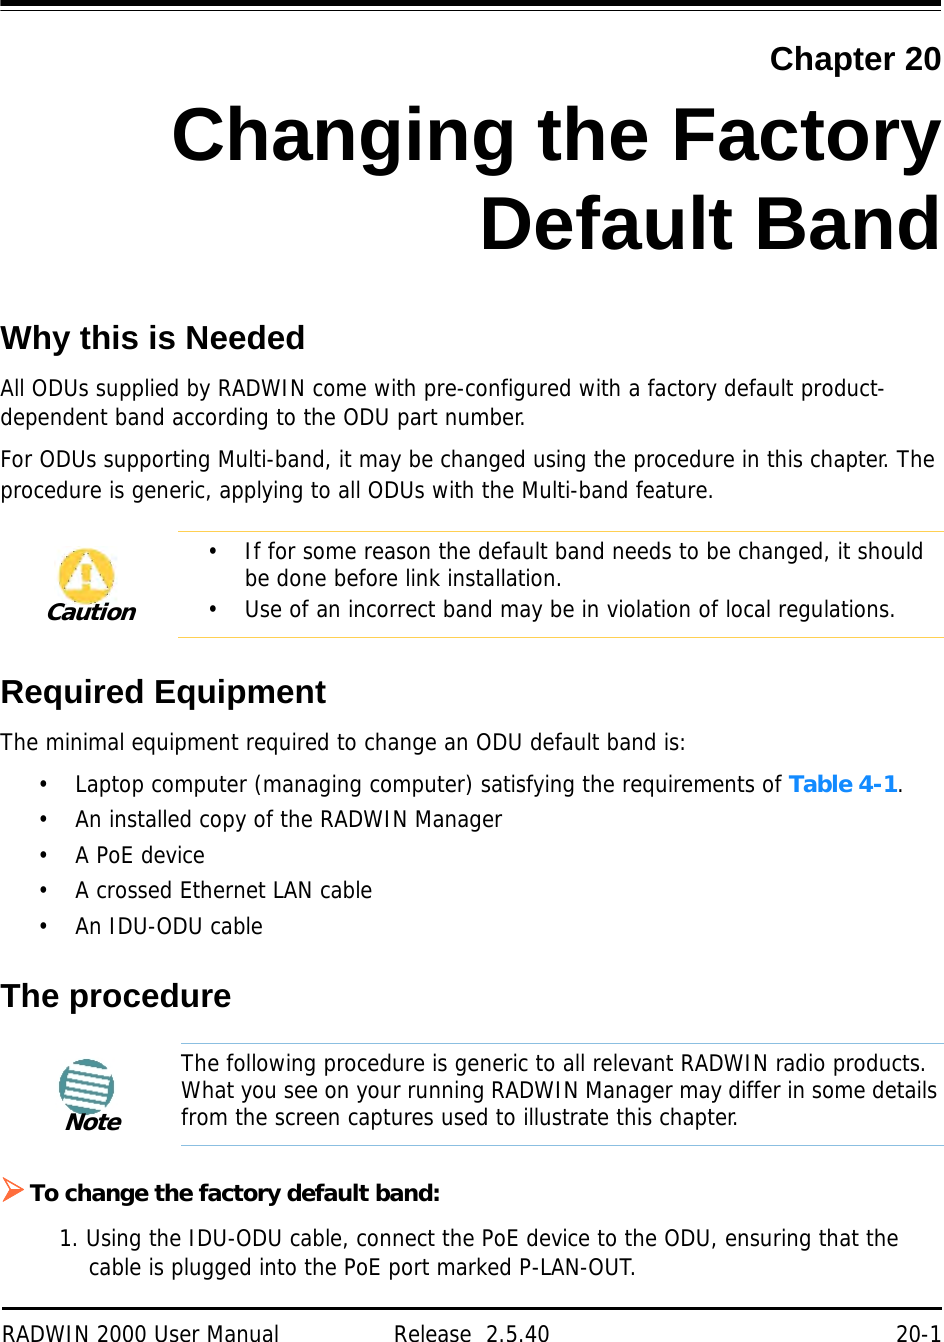 RADWIN 2000 User Manual Release  2.5.40 20-1Chapter 20Changing the FactoryDefault BandWhy this is NeededAll ODUs supplied by RADWIN come with pre-configured with a factory default product-dependent band according to the ODU part number.For ODUs supporting Multi-band, it may be changed using the procedure in this chapter. The procedure is generic, applying to all ODUs with the Multi-band feature.Required EquipmentThe minimal equipment required to change an ODU default band is:• Laptop computer (managing computer) satisfying the requirements of Table 4-1.• An installed copy of the RADWIN Manager• A PoE device• A crossed Ethernet LAN cable• An IDU-ODU cableThe procedureTo change the factory default band:1. Using the IDU-ODU cable, connect the PoE device to the ODU, ensuring that the cable is plugged into the PoE port marked P-LAN-OUT.Caution• If for some reason the default band needs to be changed, it should be done before link installation.• Use of an incorrect band may be in violation of local regulations.NoteThe following procedure is generic to all relevant RADWIN radio products. What you see on your running RADWIN Manager may differ in some details from the screen captures used to illustrate this chapter.